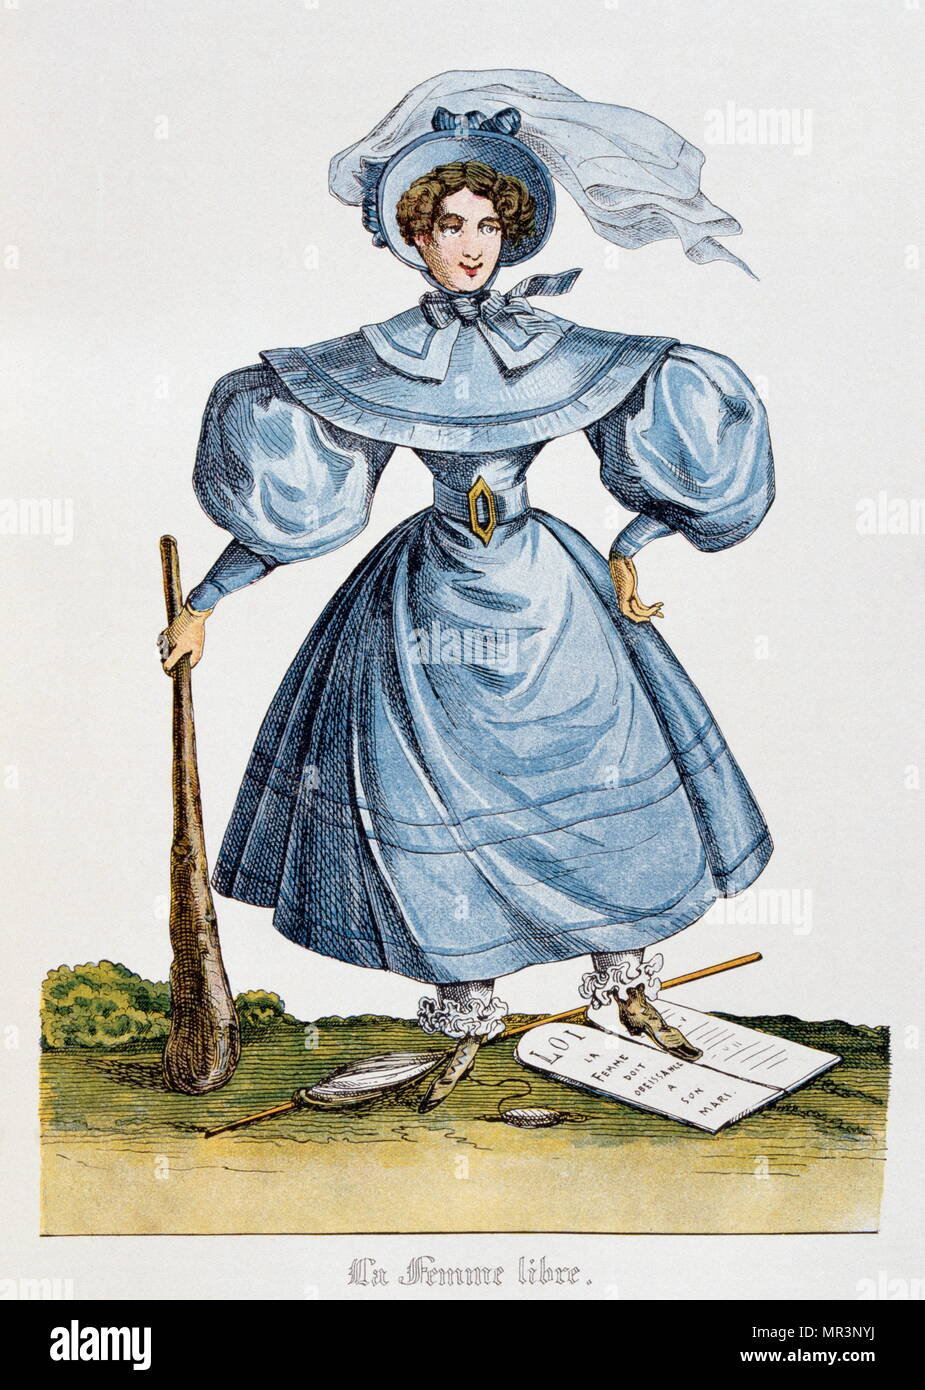 The Liberated Woman, Illustration from Les Saint-Simoniens, 1830, by Henry-René D'Allemagne. Saint-Simonism was an ideology based on a socio-economic and political doctrine, the influence of which was decisive in the nineteenth century. It takes its name from the count of Saint-Simon (1760-1825). His disciple or supporter is called 'Saint-Simonian.' It can be considered as the founding thought of French industrial society. Stock Photo